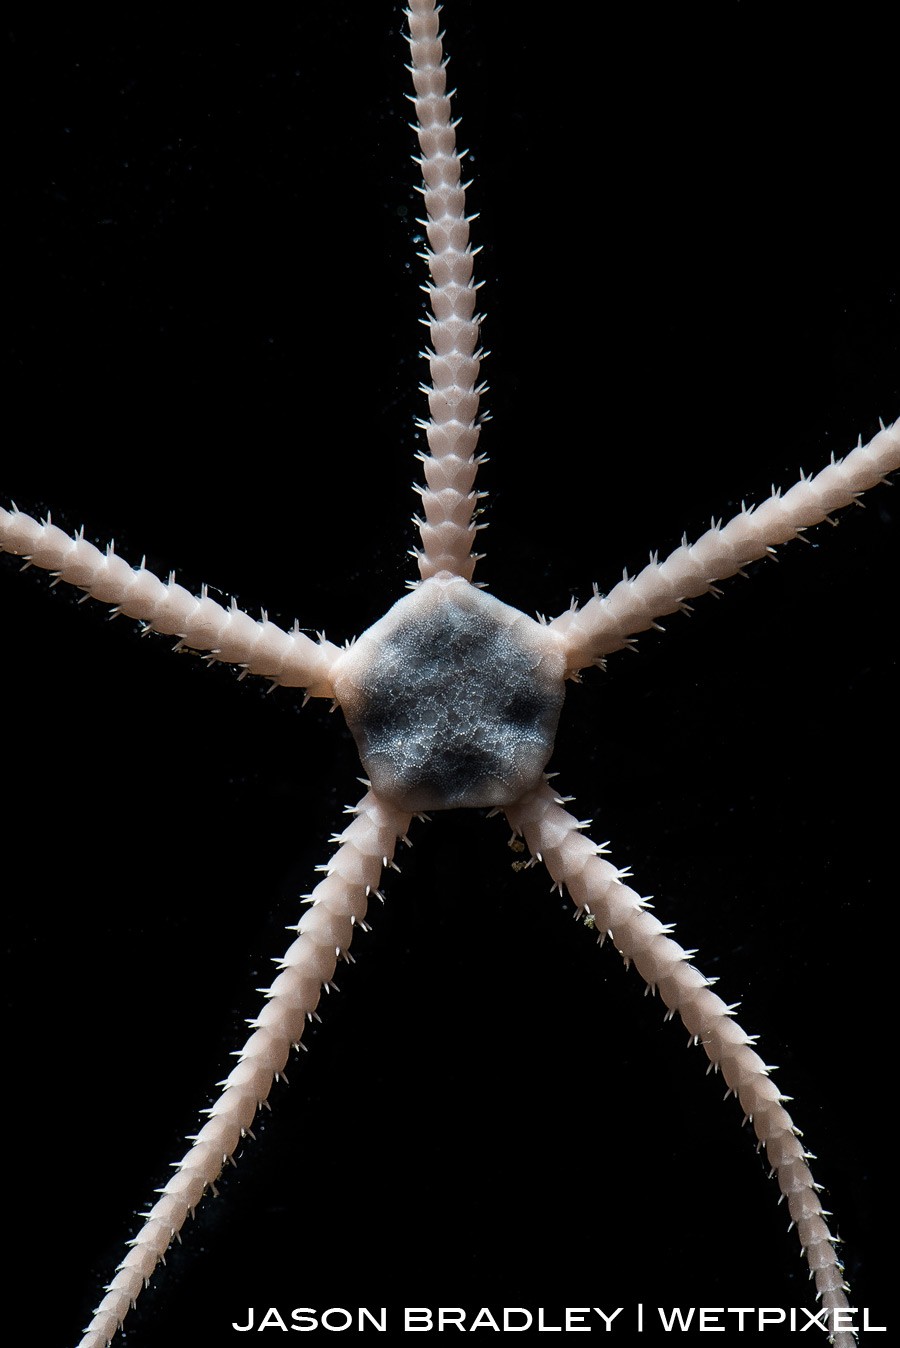 A brittle-star (*Ophiuroidea*) from 2000 meters below.